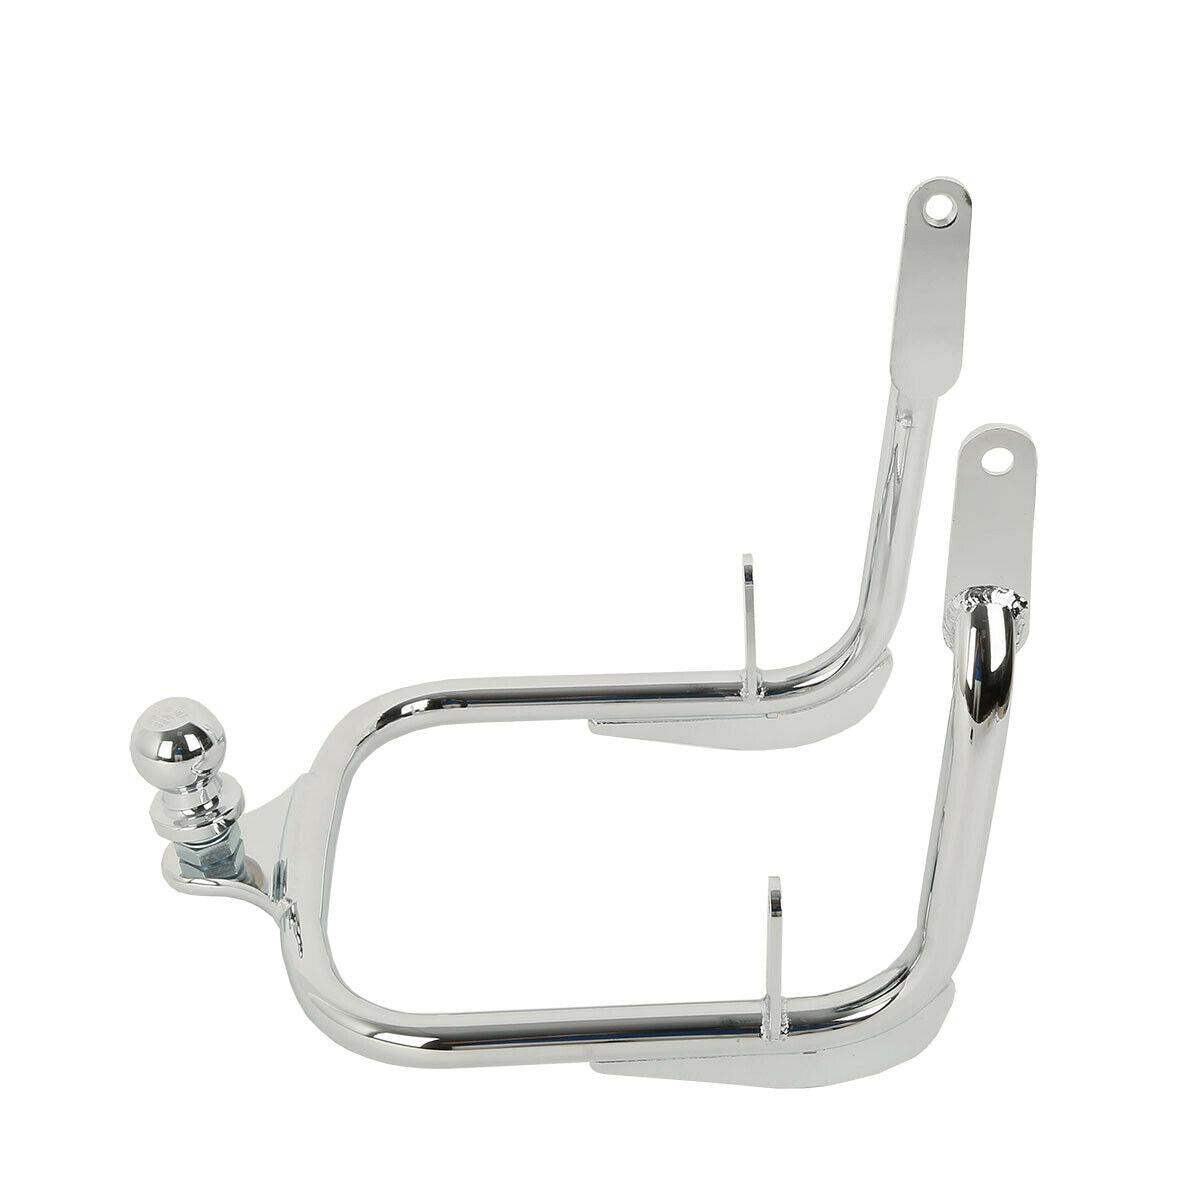 Chrome Trailer Hitch Tow Fit For Harley Touring Road King Electra Glide 09-13 12 - Moto Life Products